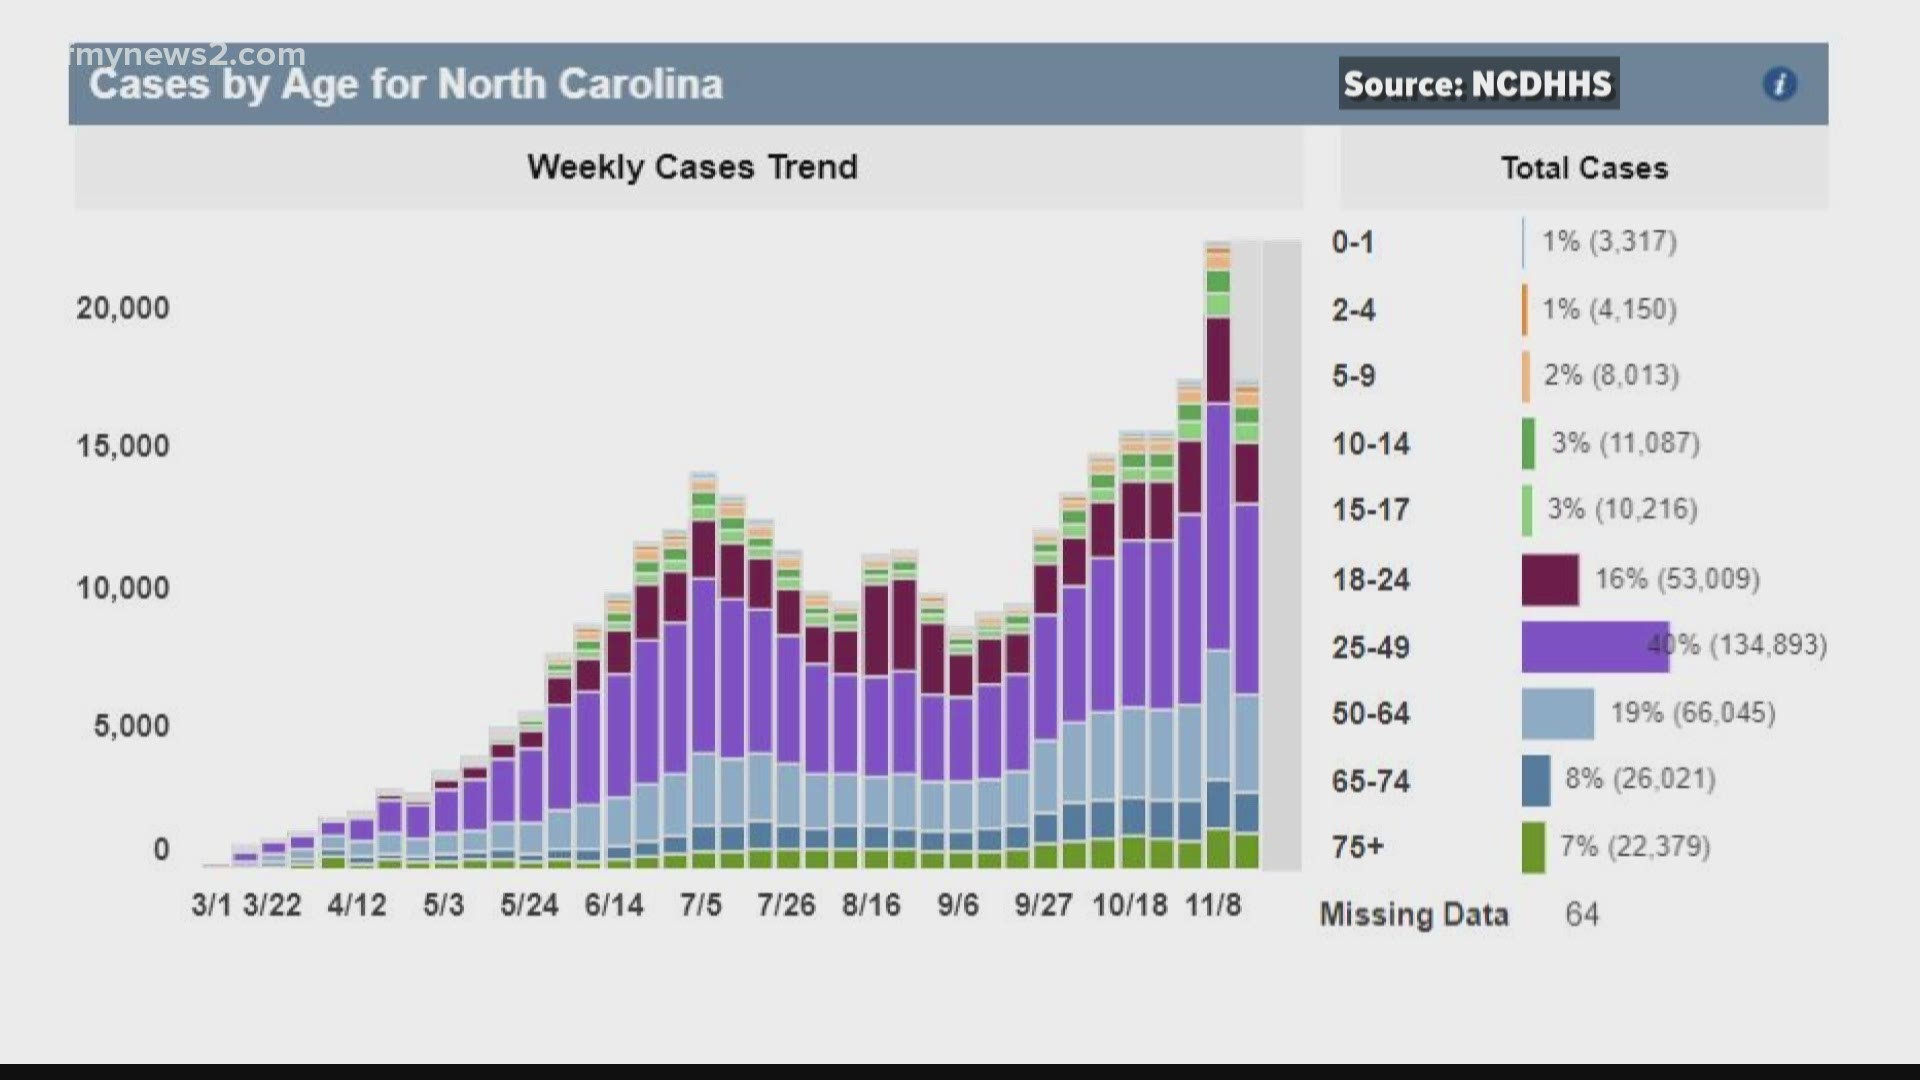 NC demographics reveal the large majority of COVID cases are ages 20 to 49, though seniors are most likely to be hospitalized with severe symptoms.